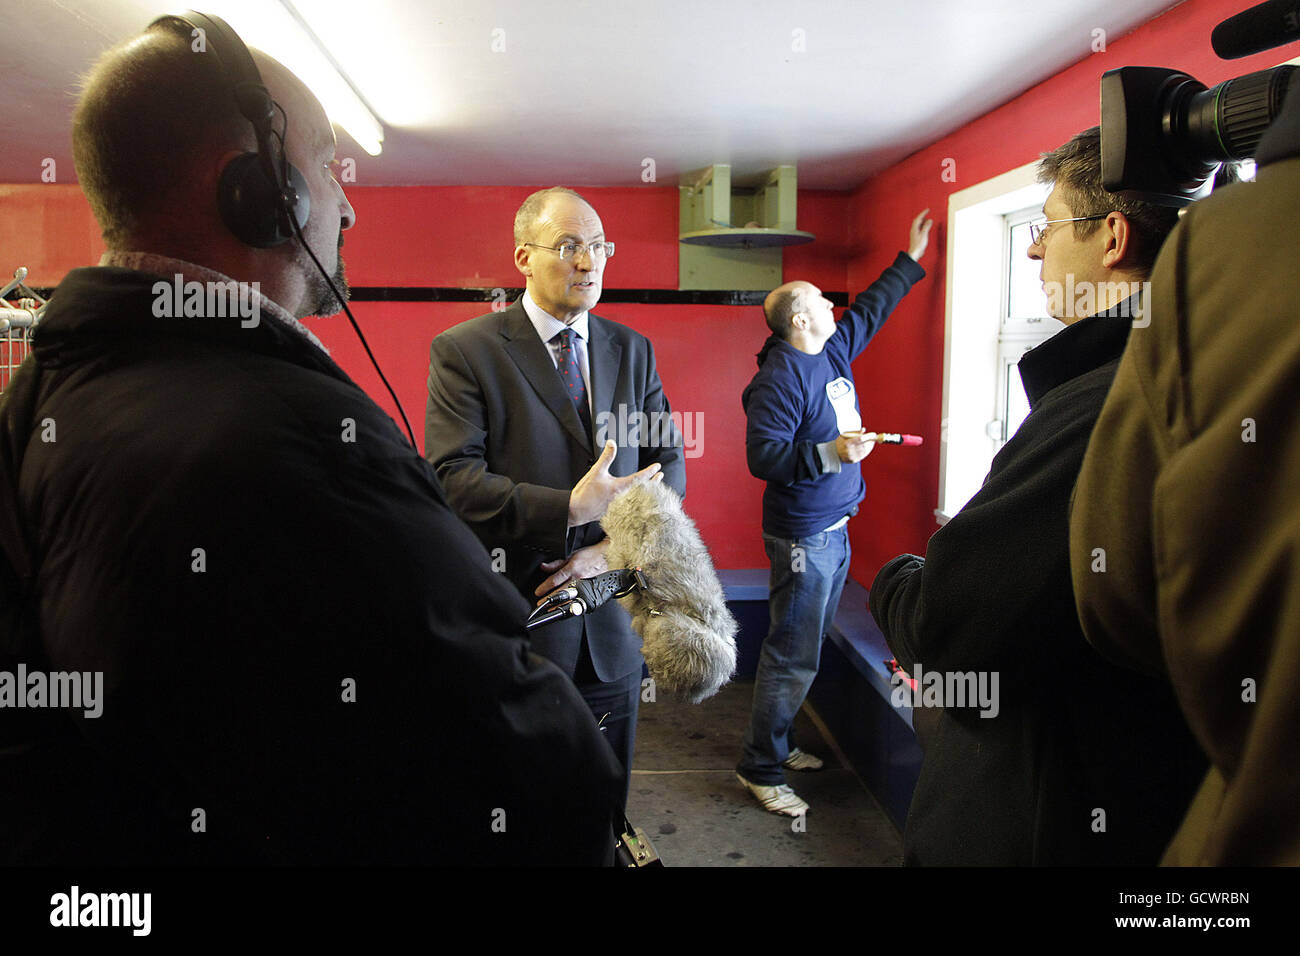 SRU Chief Executive, Gordon McKie is interviewed after Scottish Rugby and RBS announced a three and a half year partnership between the two organisations at North Berwick Rugby Club, North Berwick. Stock Photo